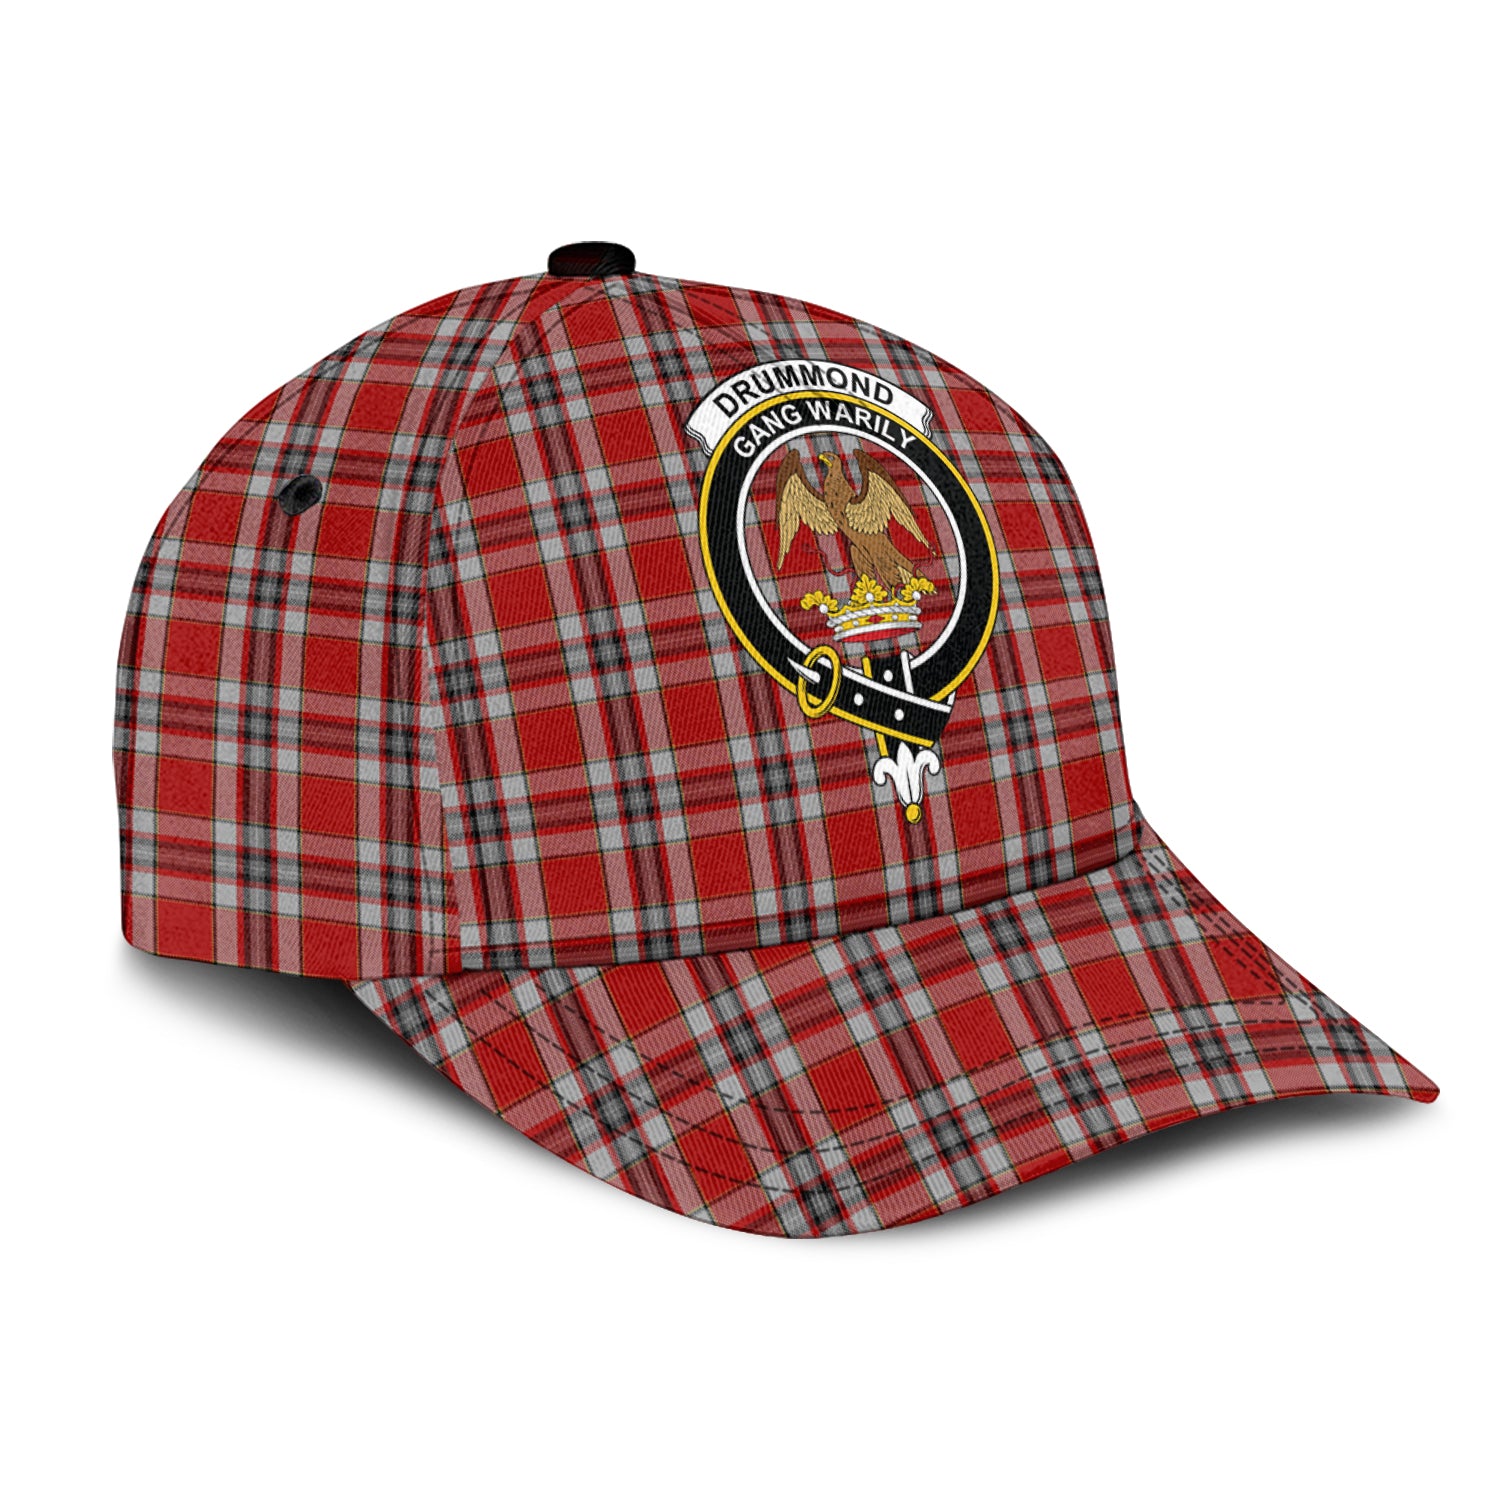 drummond-of-perth-dress-tartan-classic-cap-with-family-crest